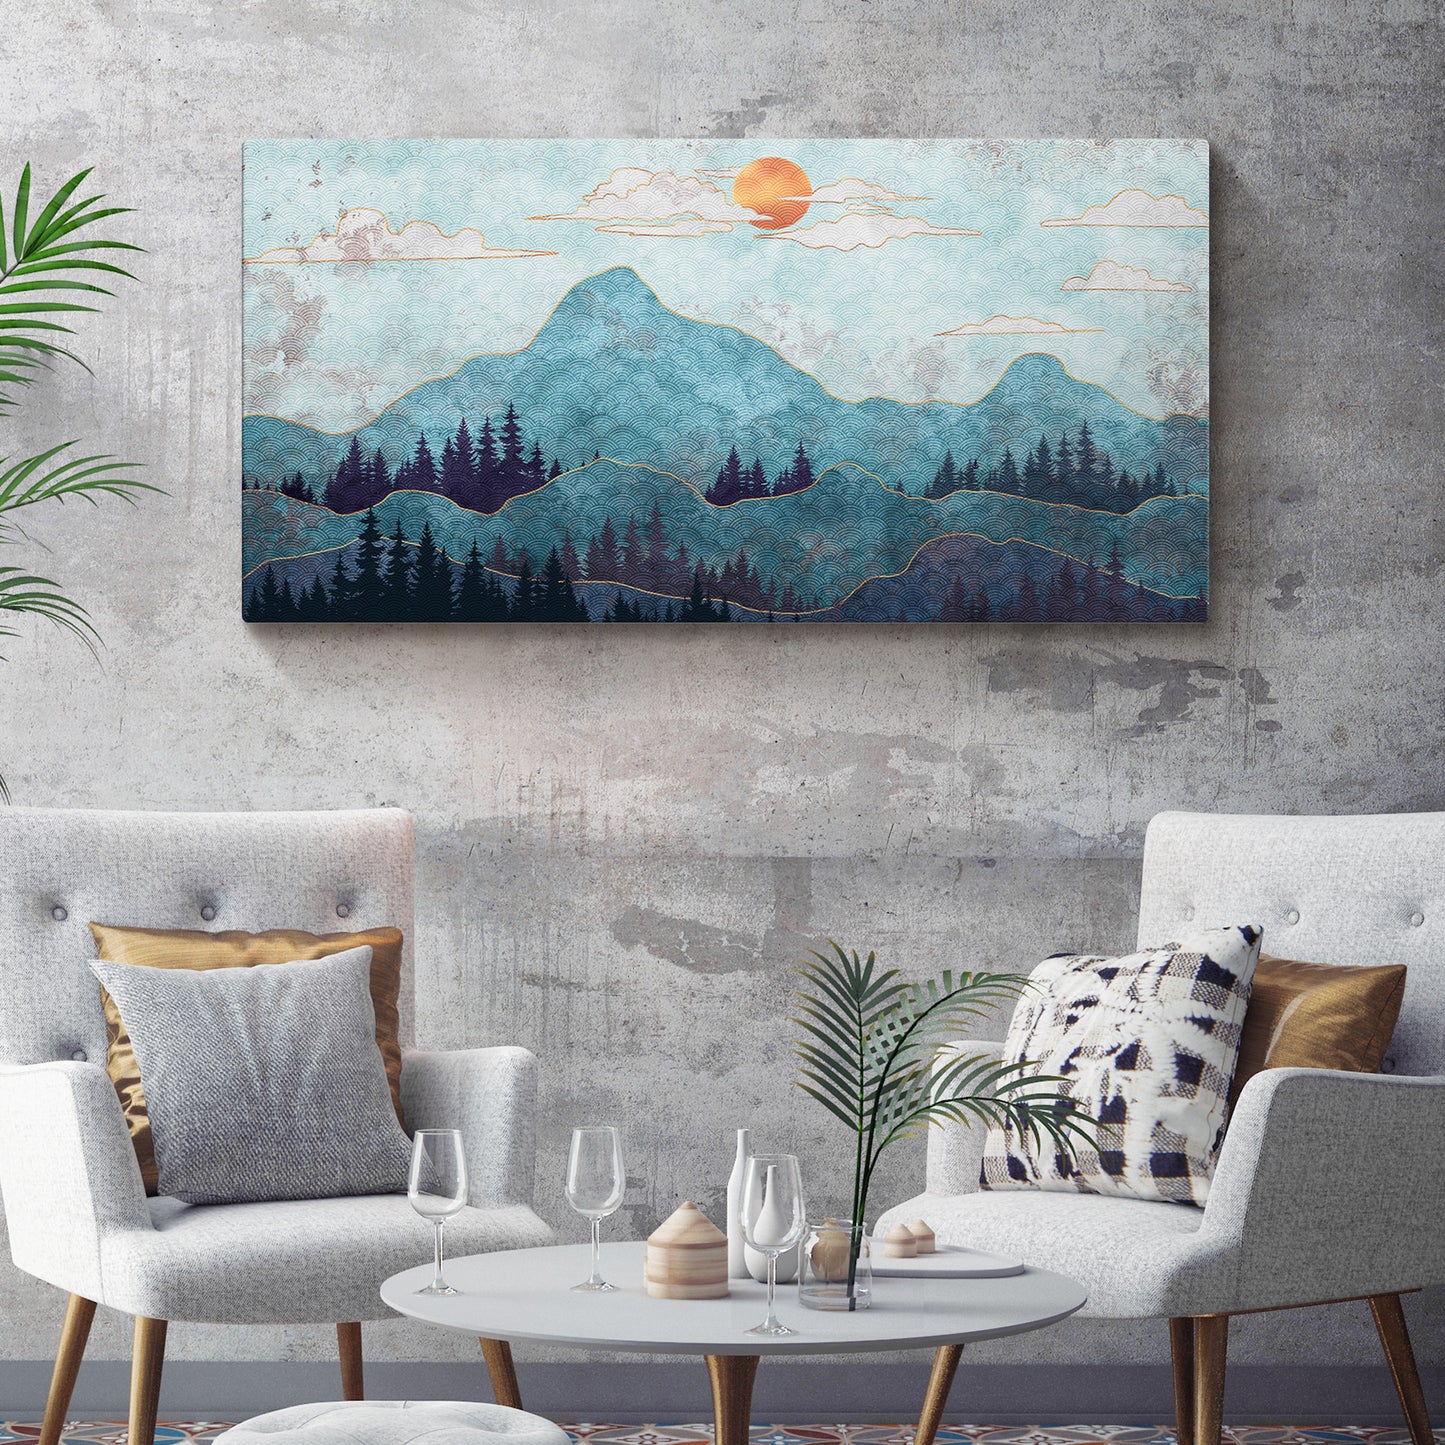 Mountain Hues Canvas Wall Art Style 2 - Image by Tailored Canvases